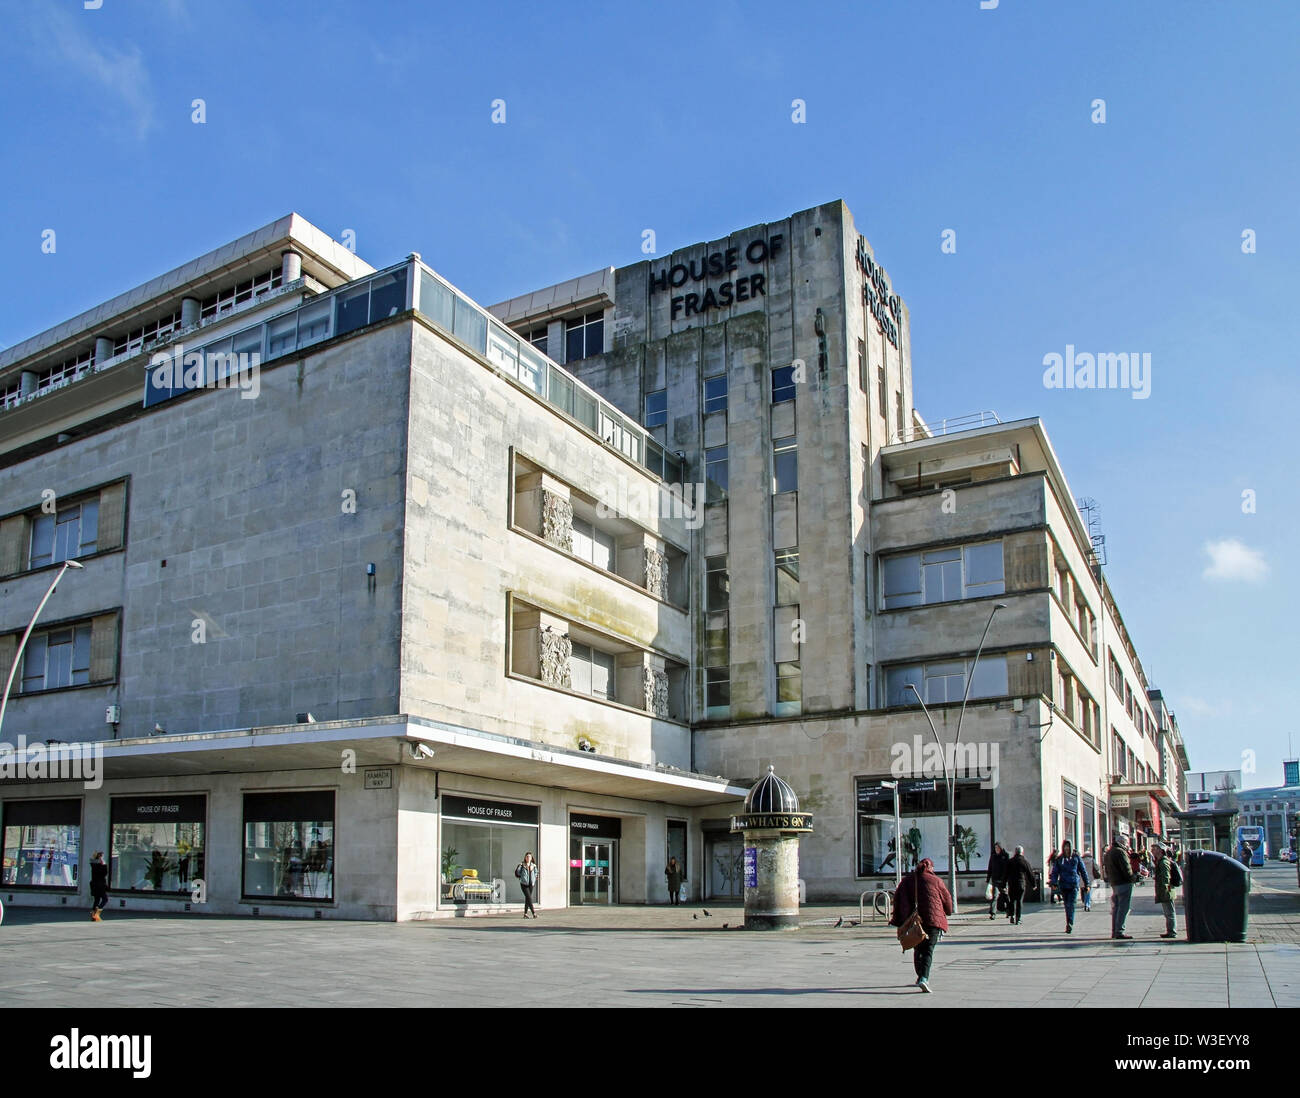 Plymouth’s House of Fraser department store on Royal Parade. Part of the Sports Direct group. Stock Photo